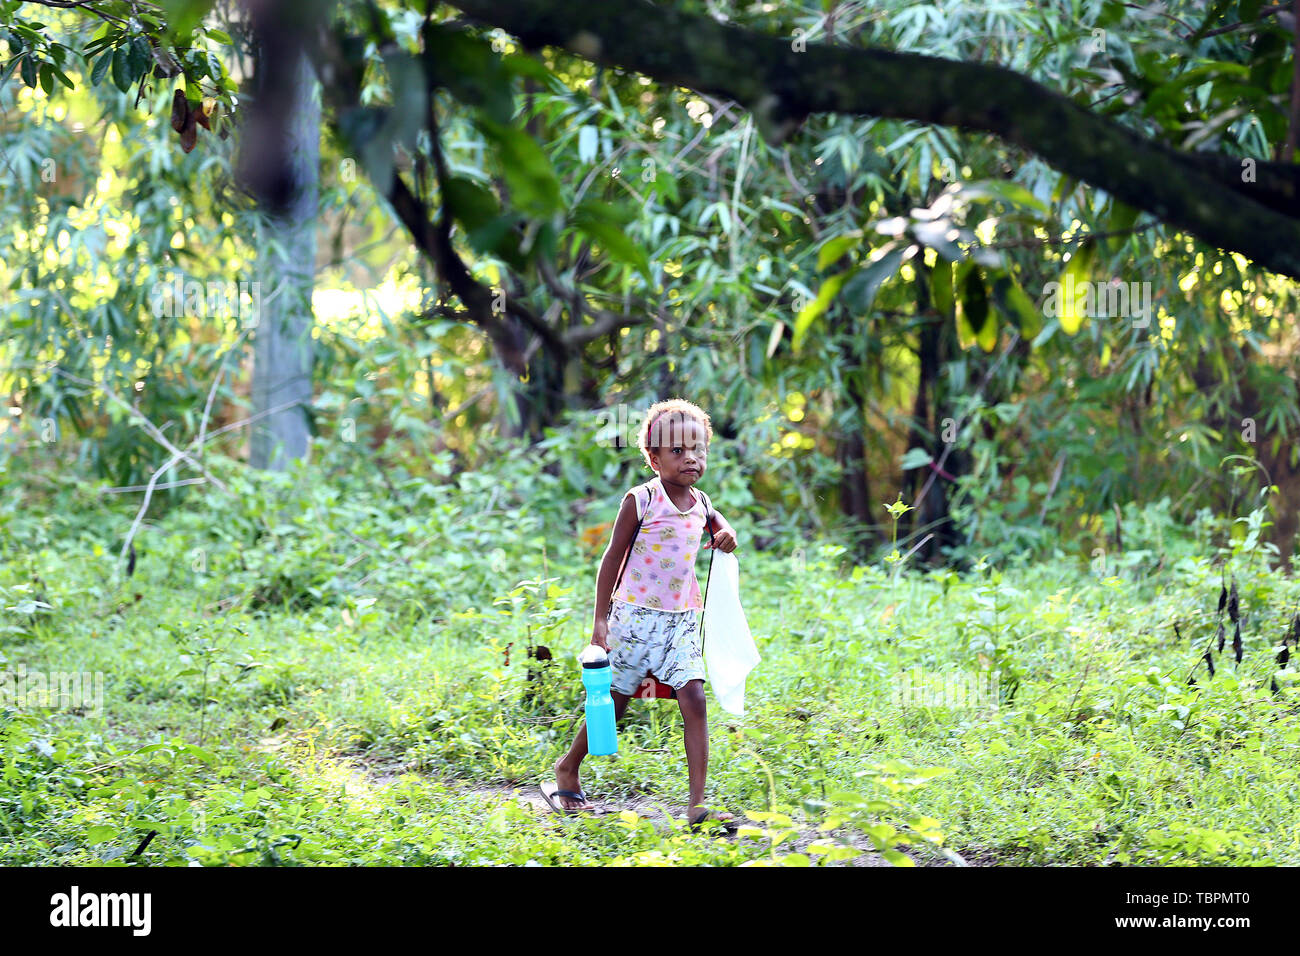 Pampanga Province, Philippines. 3rd June, 2019. A girl from the indigenous group 'Aeta' walks to school during the first day of classes in temporary classrooms of Diaz Elementary school in Pampanga Province, the Philippines, June 3, 2019. Temporary classrooms were set up after the Aeta community's classrooms were destroyed by the earthquake last April, as today marks the first day of new school year in the Philippines. Credit: Rouelle Umali/Xinhua/Alamy Live News Stock Photo